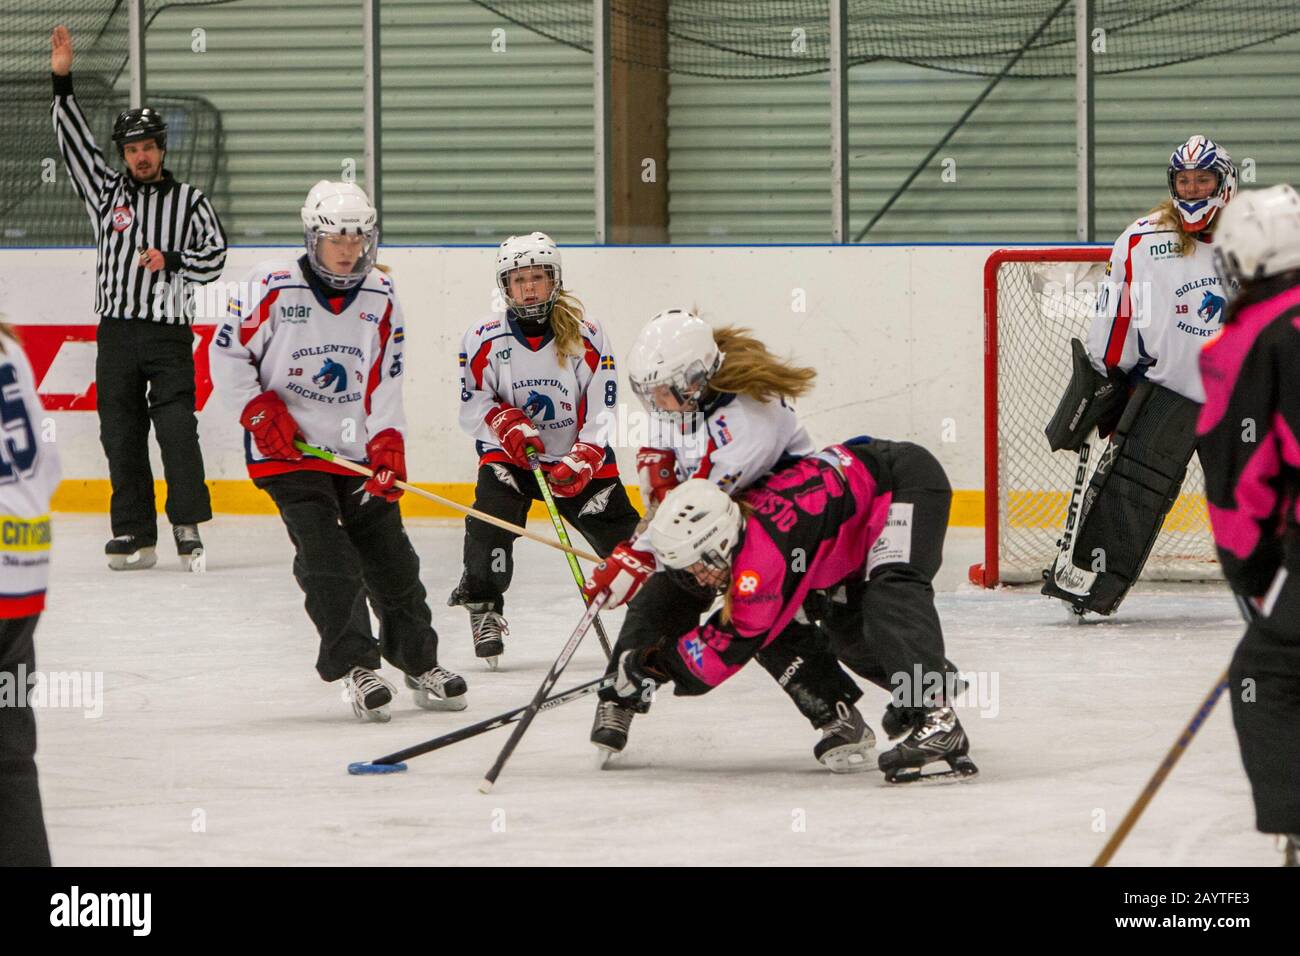 Girls compete in the sport ringette. Stock Photo